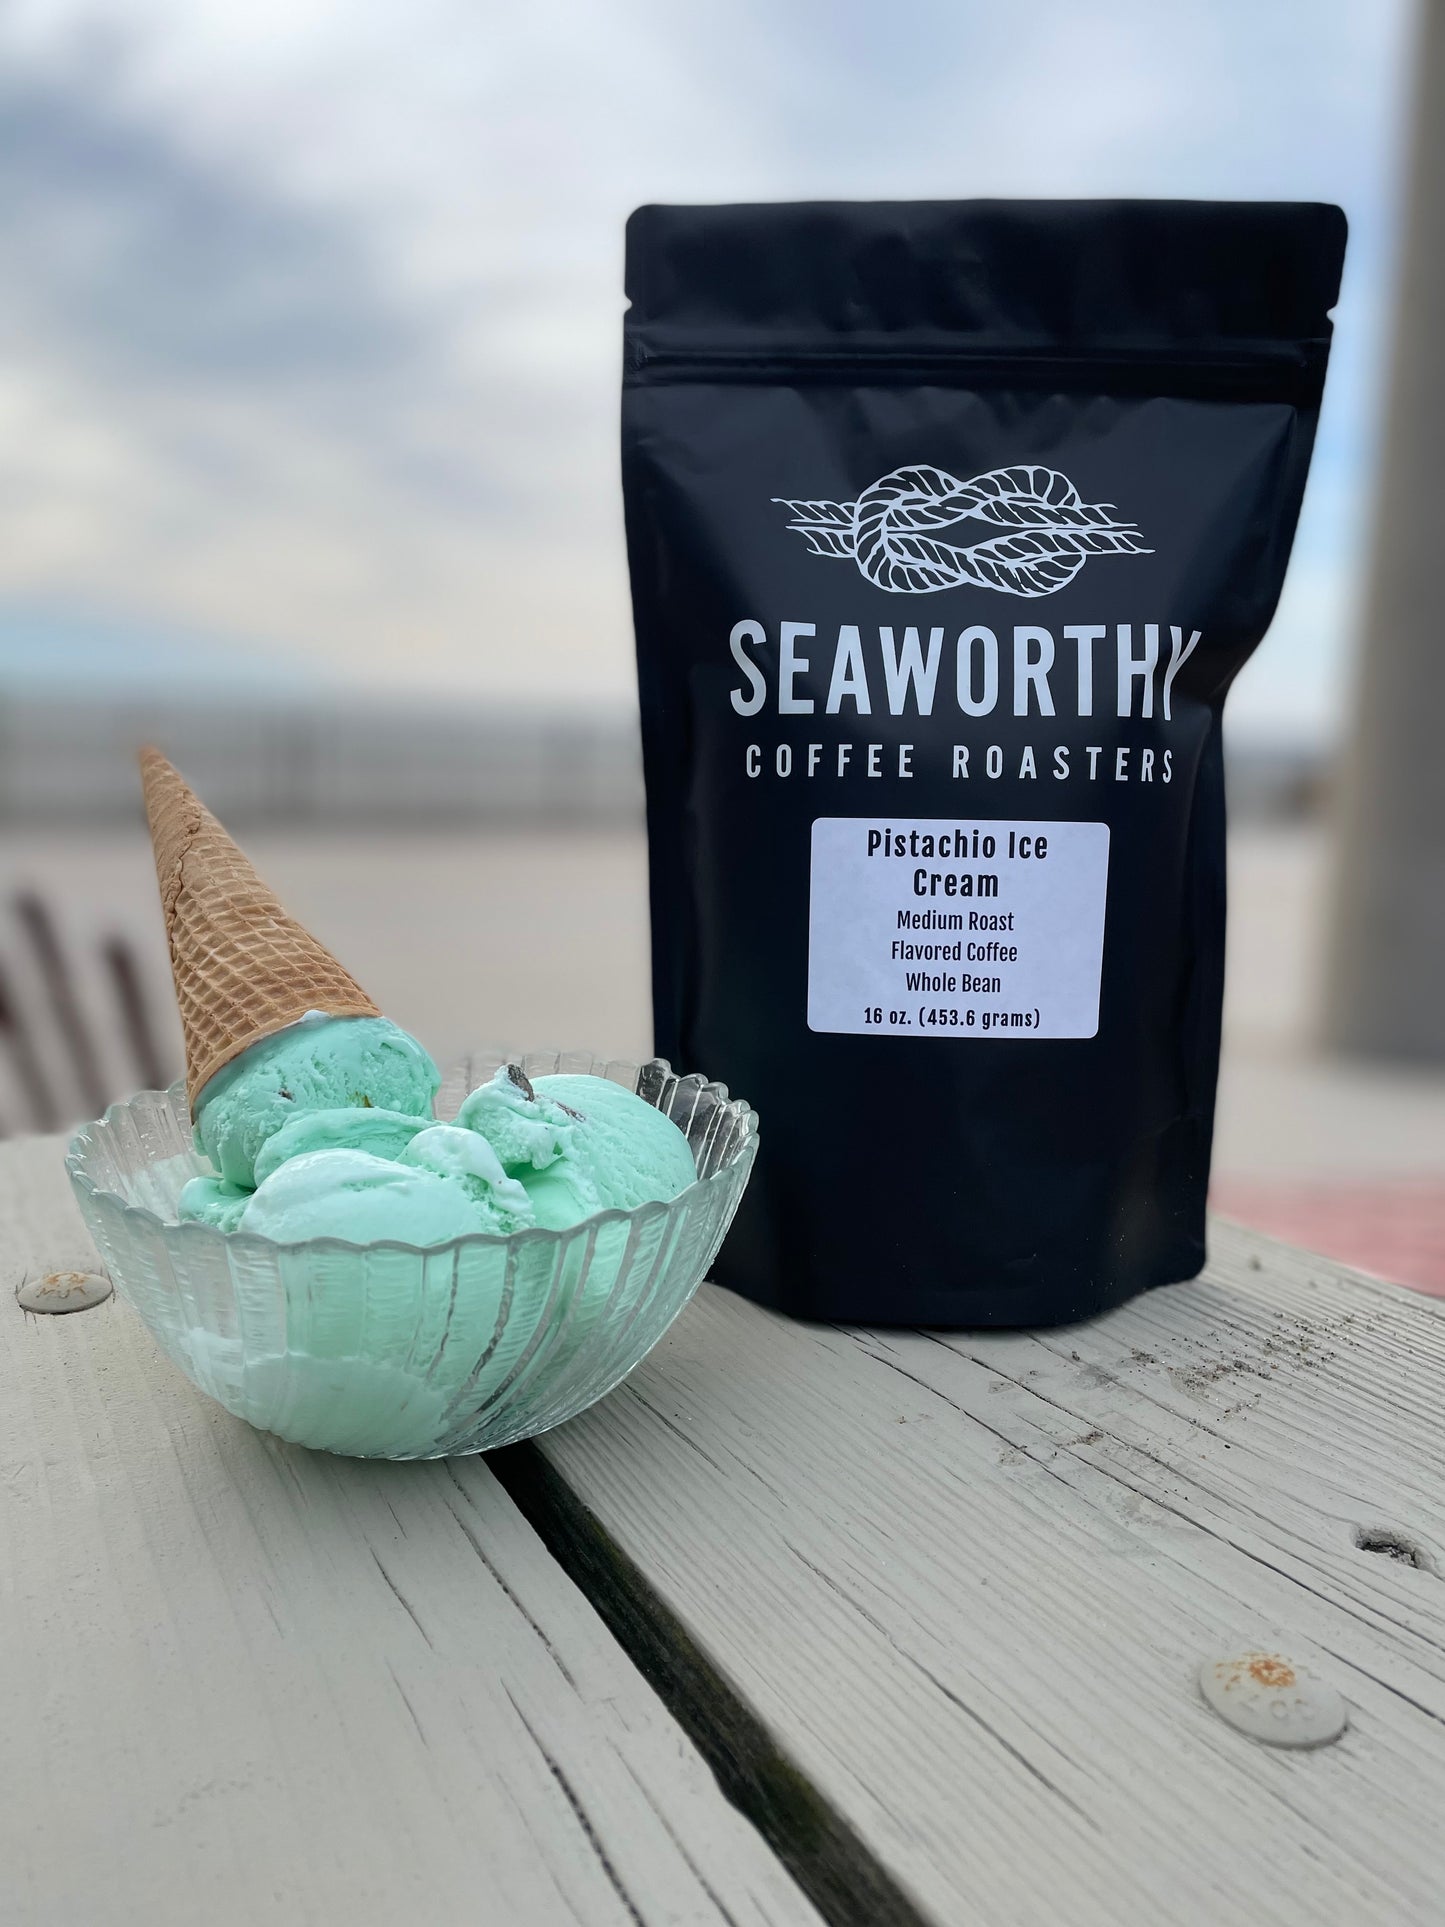 Imagine yourself at the beach on the first warm day of summer, running up to the ice cream stand for a refreshing cone.  Pistachio Ice Cream flavored coffee wants to bring that moment to your mug.  We highly recommend enjoying this one cold brewed!  As always, there are absolutely no allergens or sugars in Seaworthy flavored coffee.